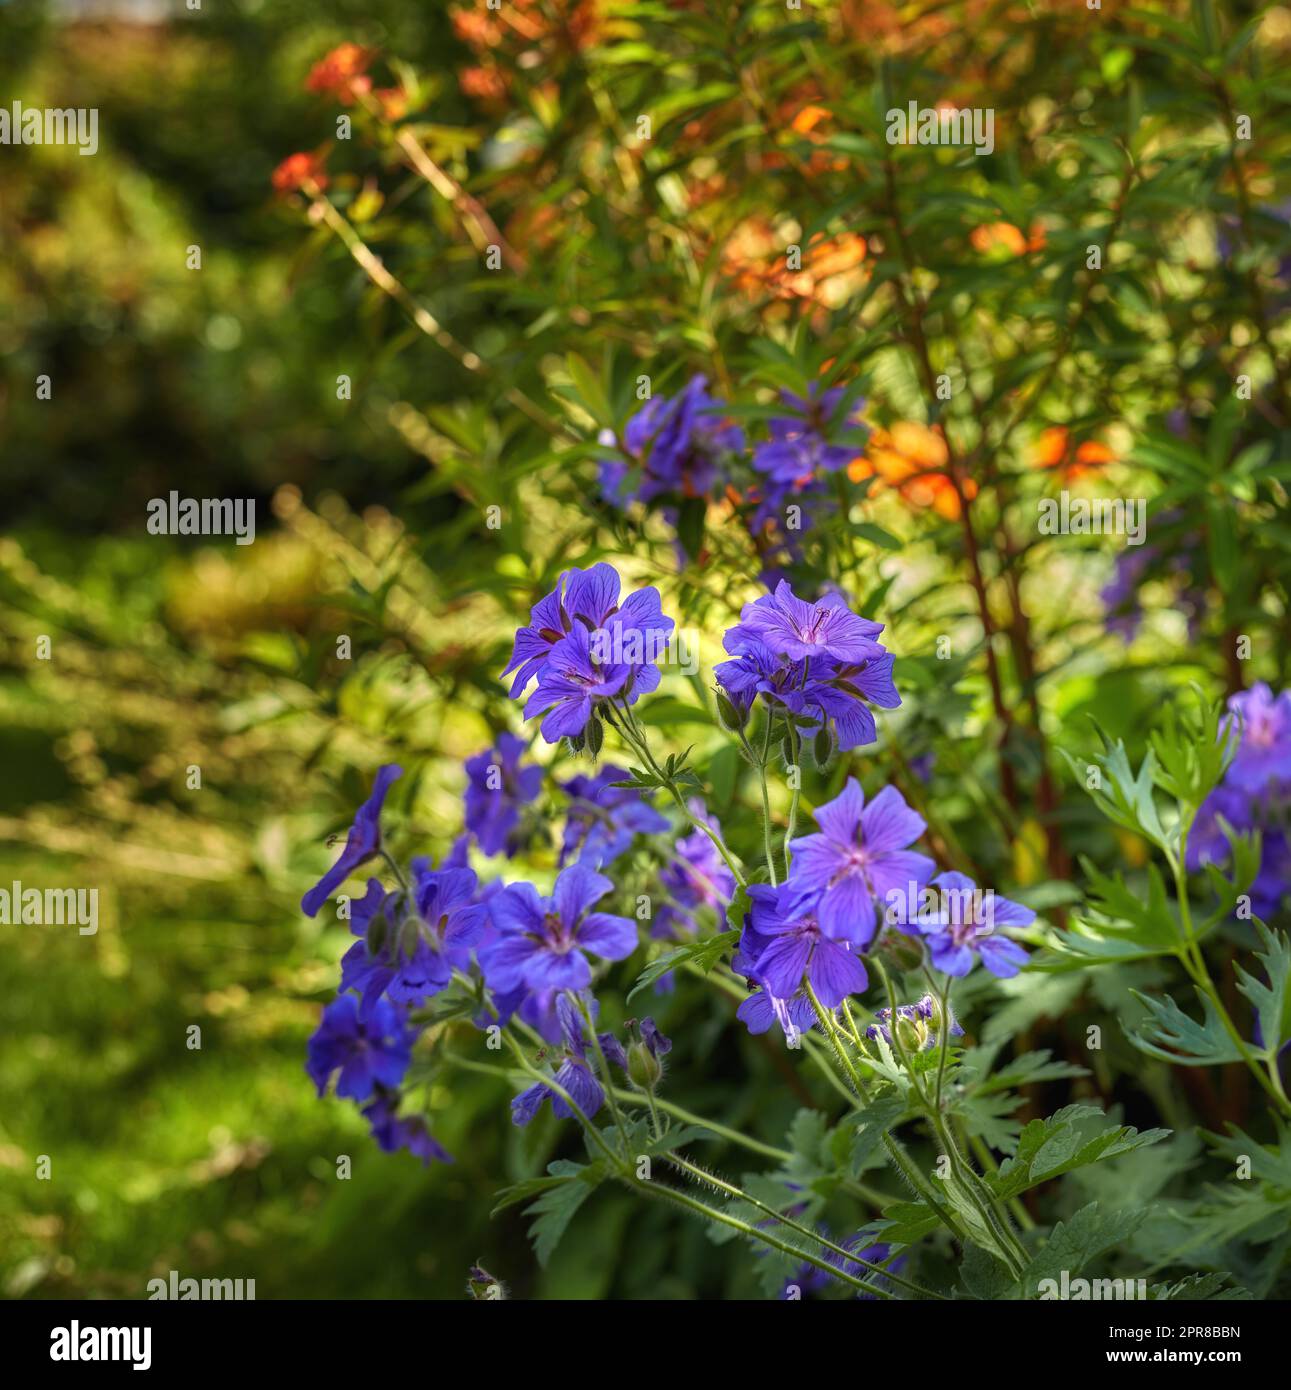 Blue hardy geranium flowers in a park. Bush of indigo geraniums blooming in a botanical garden or backyard in spring outside. Delicate perennial wild blossoms growing on blurred nature background Stock Photo